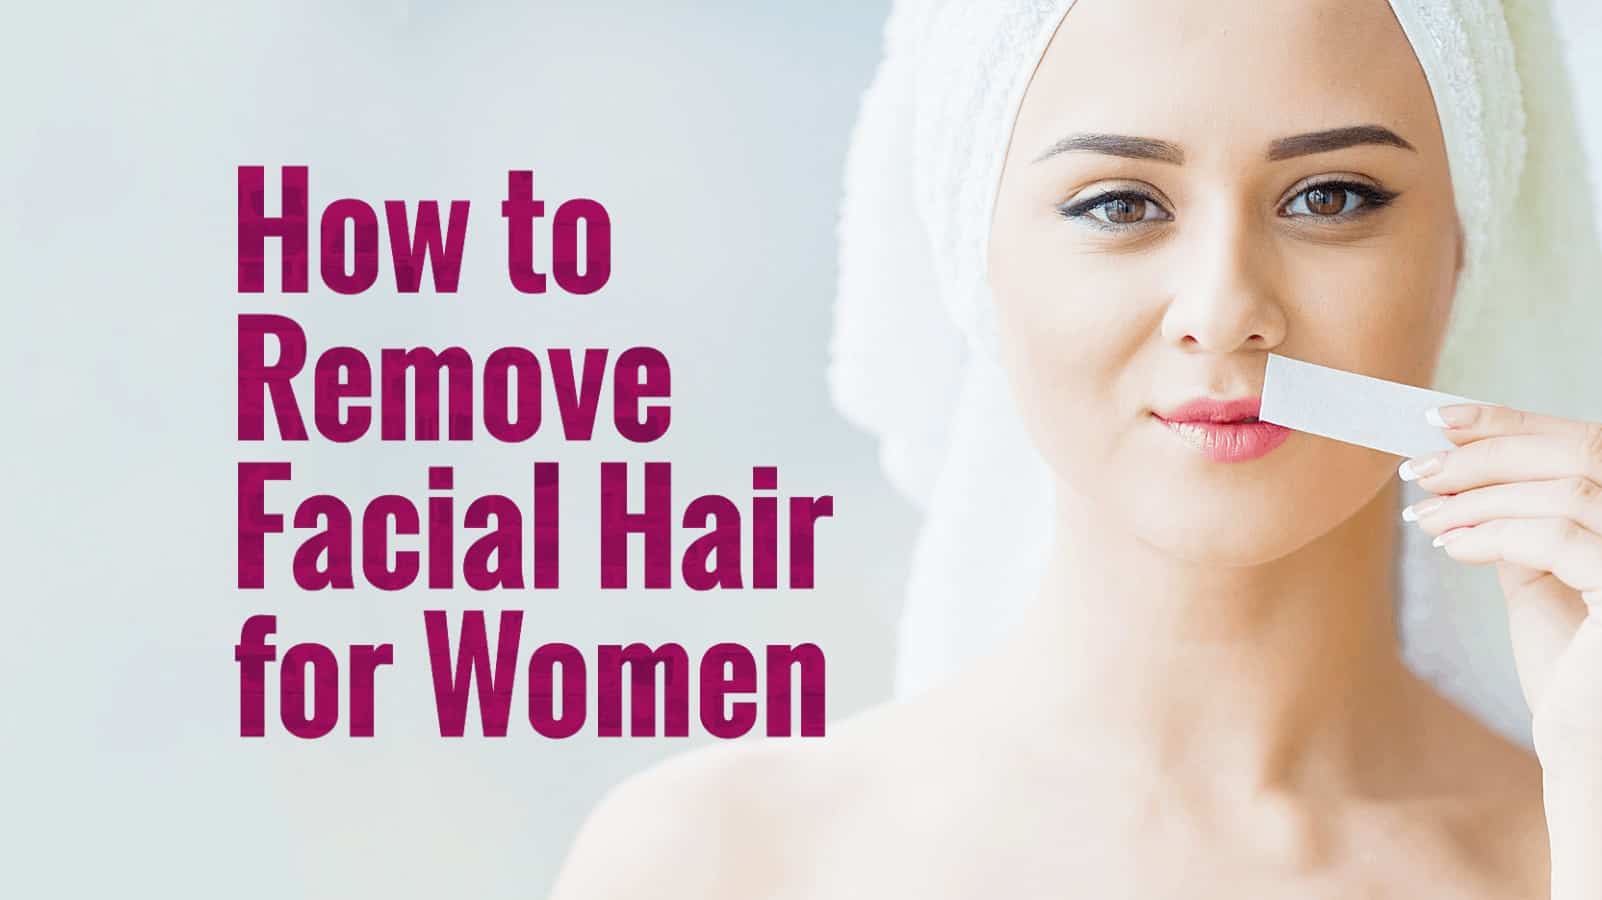 How to Remove Facial Hair for Women